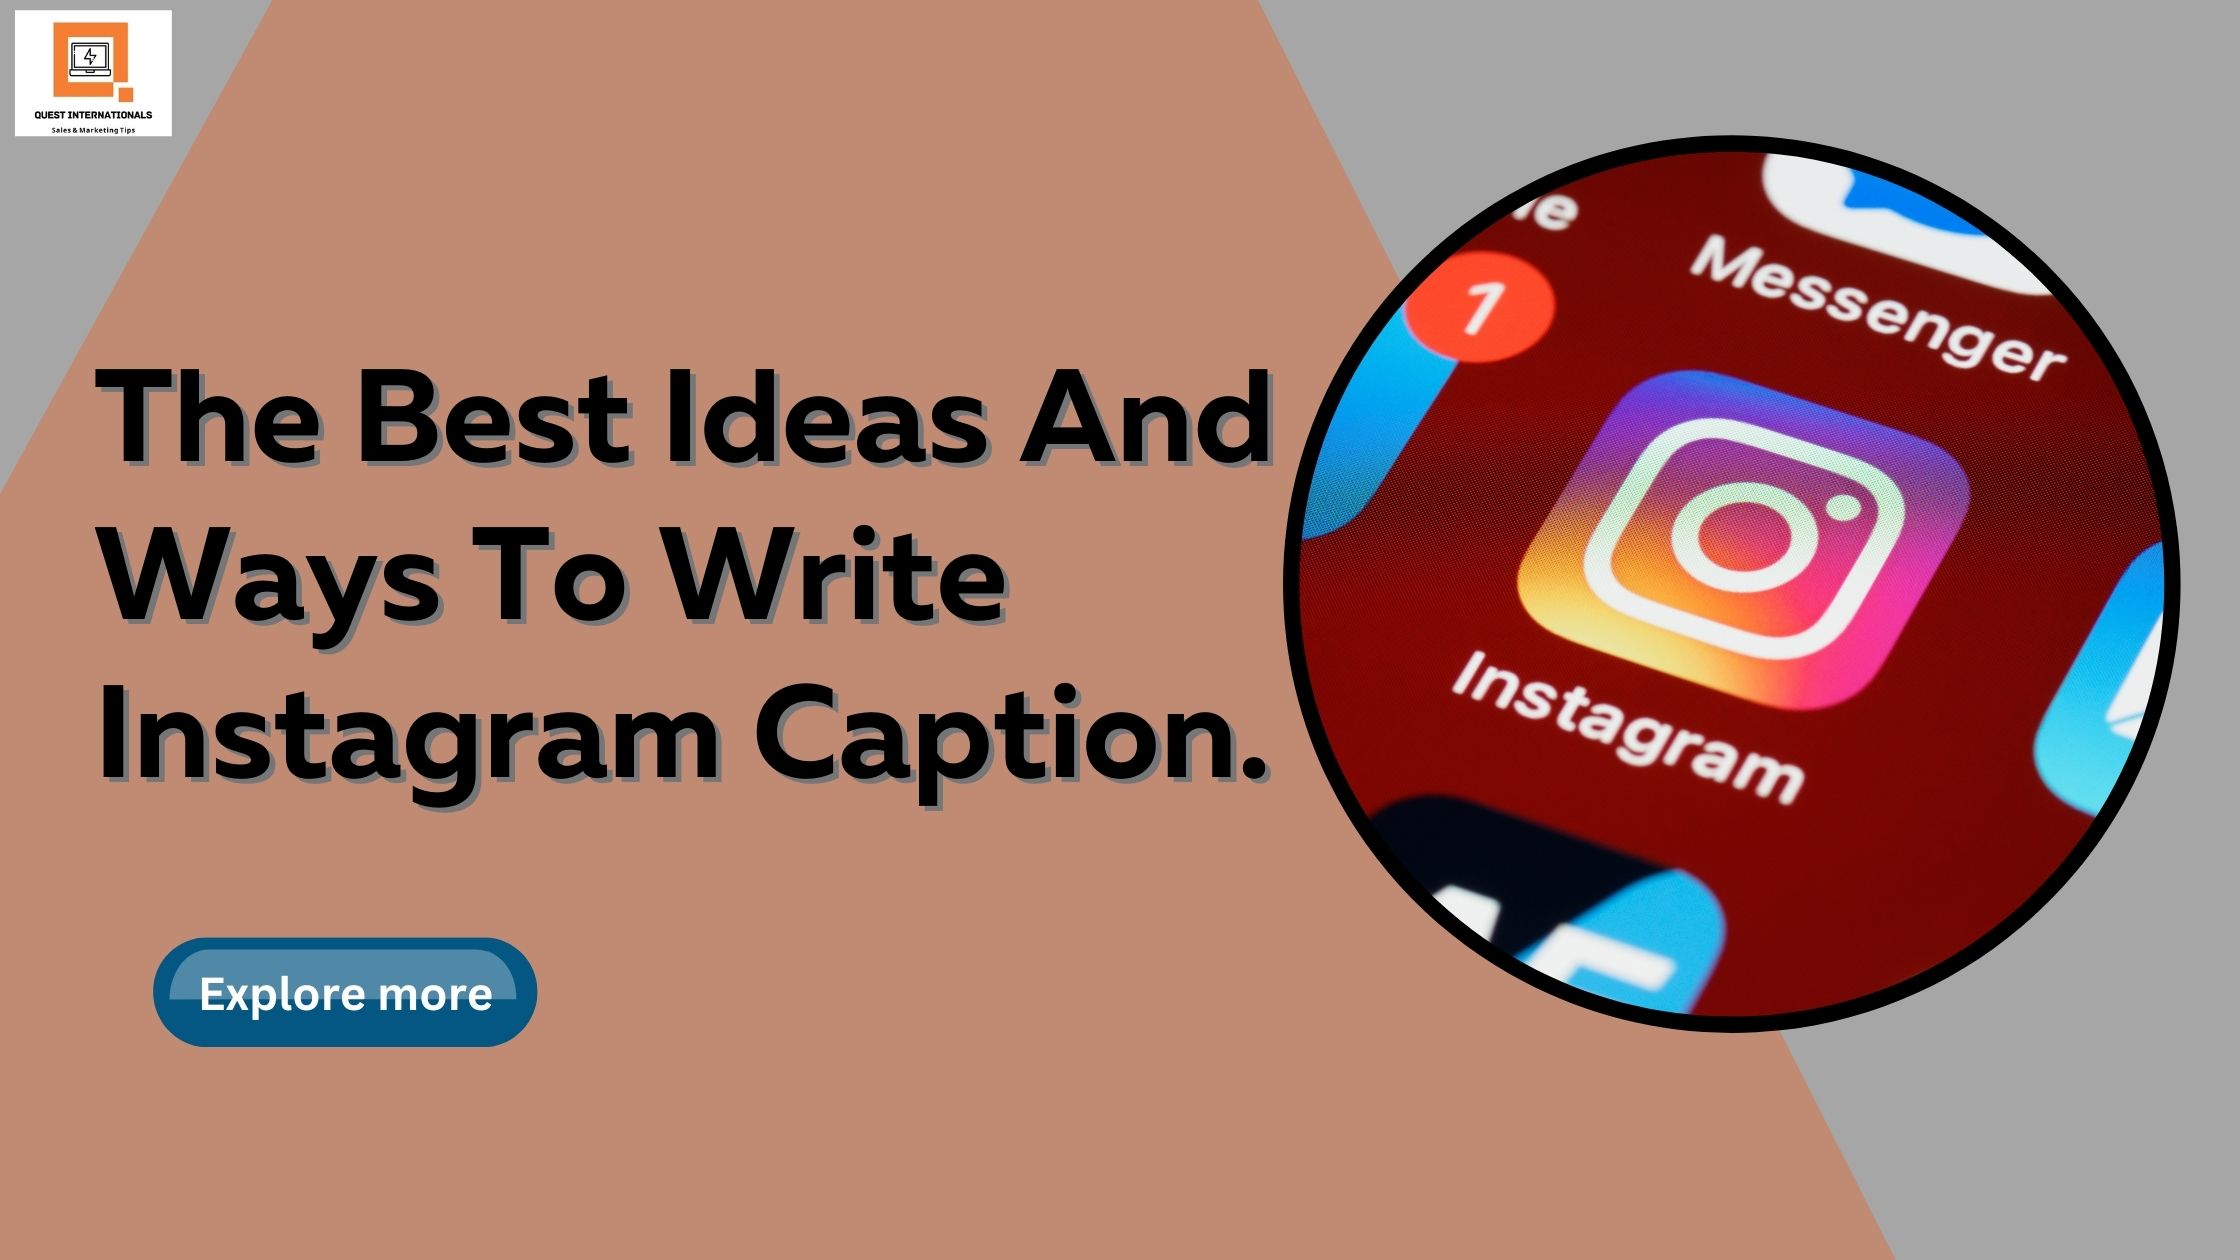 You are currently viewing The Best Ideas And Ways To Write Instagram Caption.